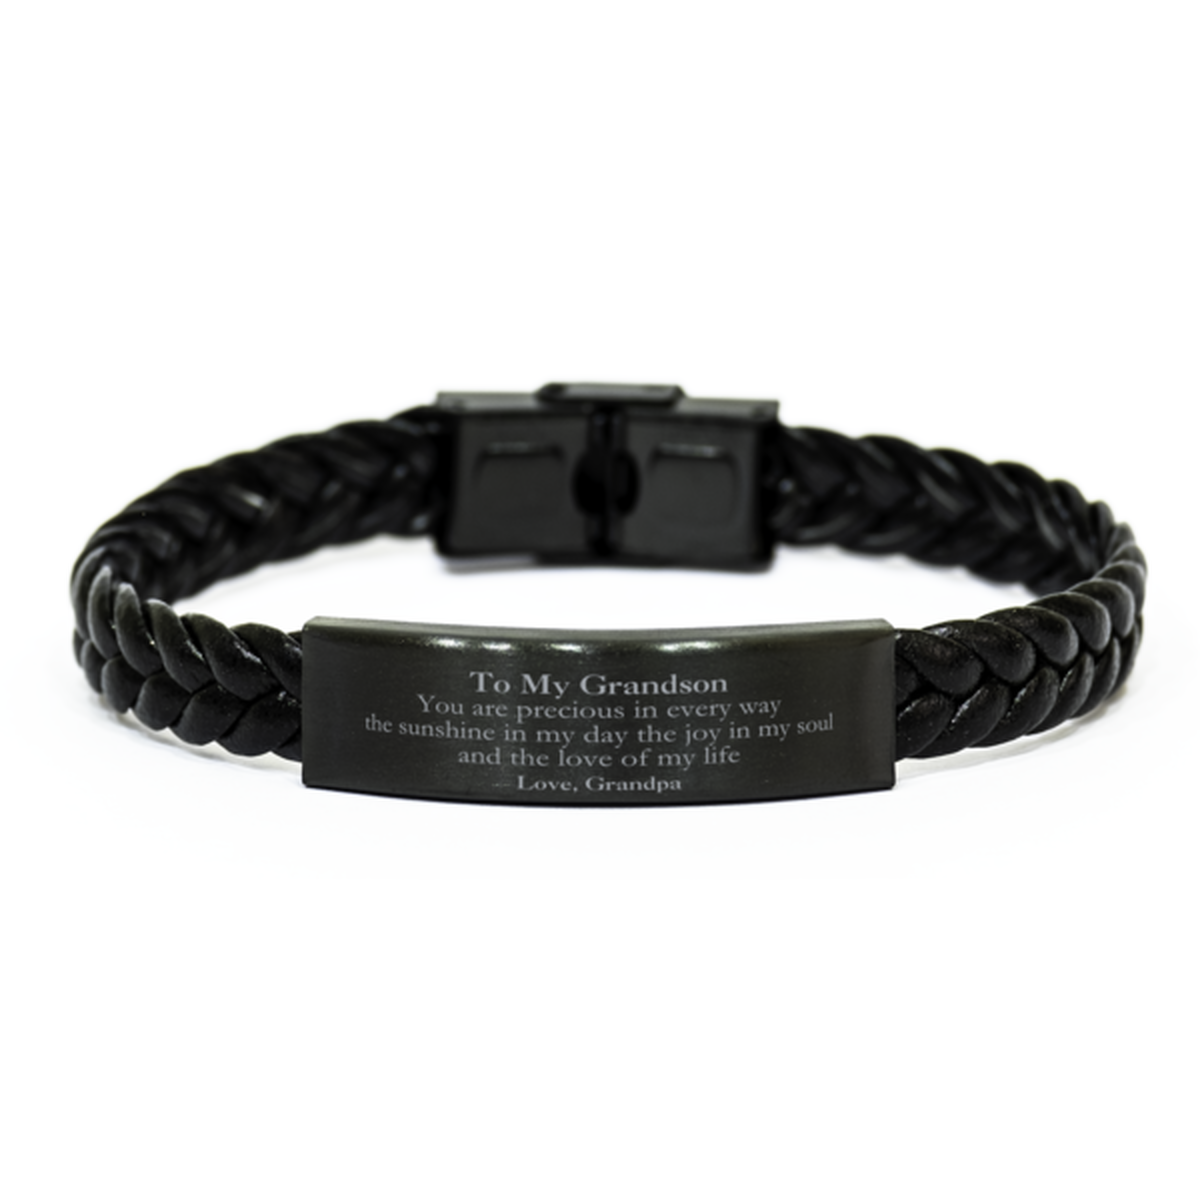 Graduation Gifts for Grandson Braided Leather Bracelet Present from Grandpa, Christmas Grandson Birthday Gifts Grandson You are precious in every way the sunshine in my day. Love, Grandpa